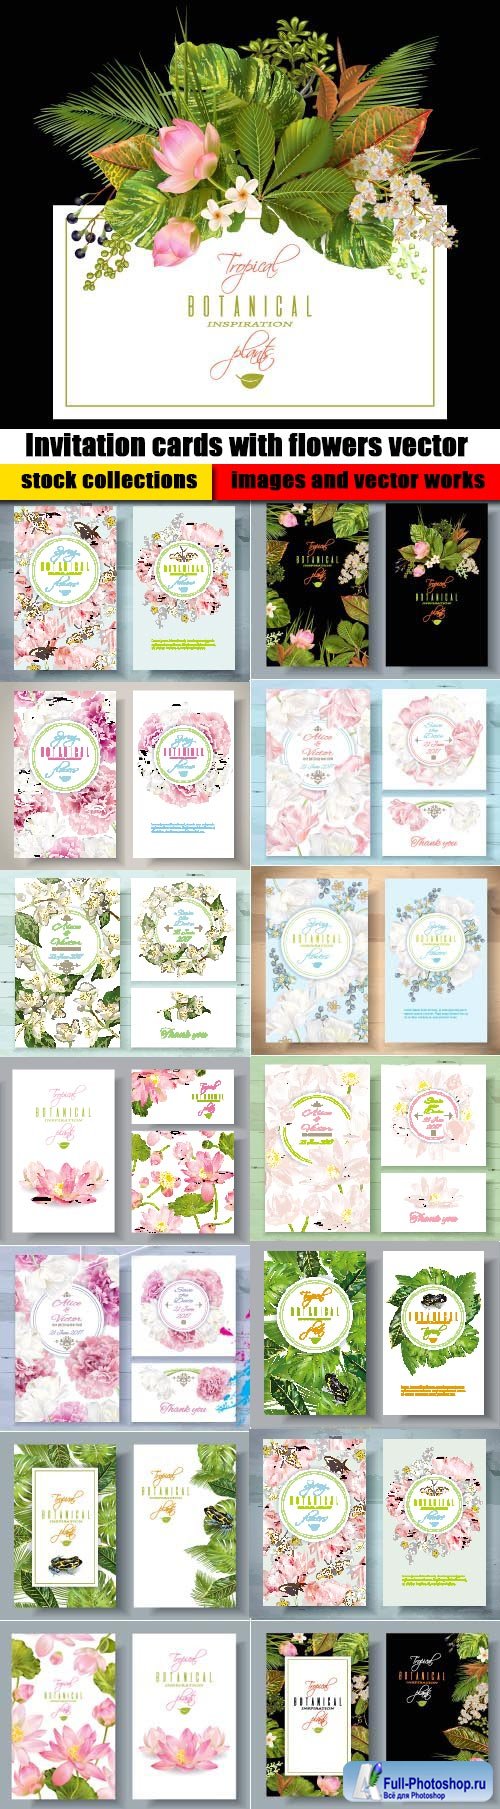 Invitation cards with flowers vector